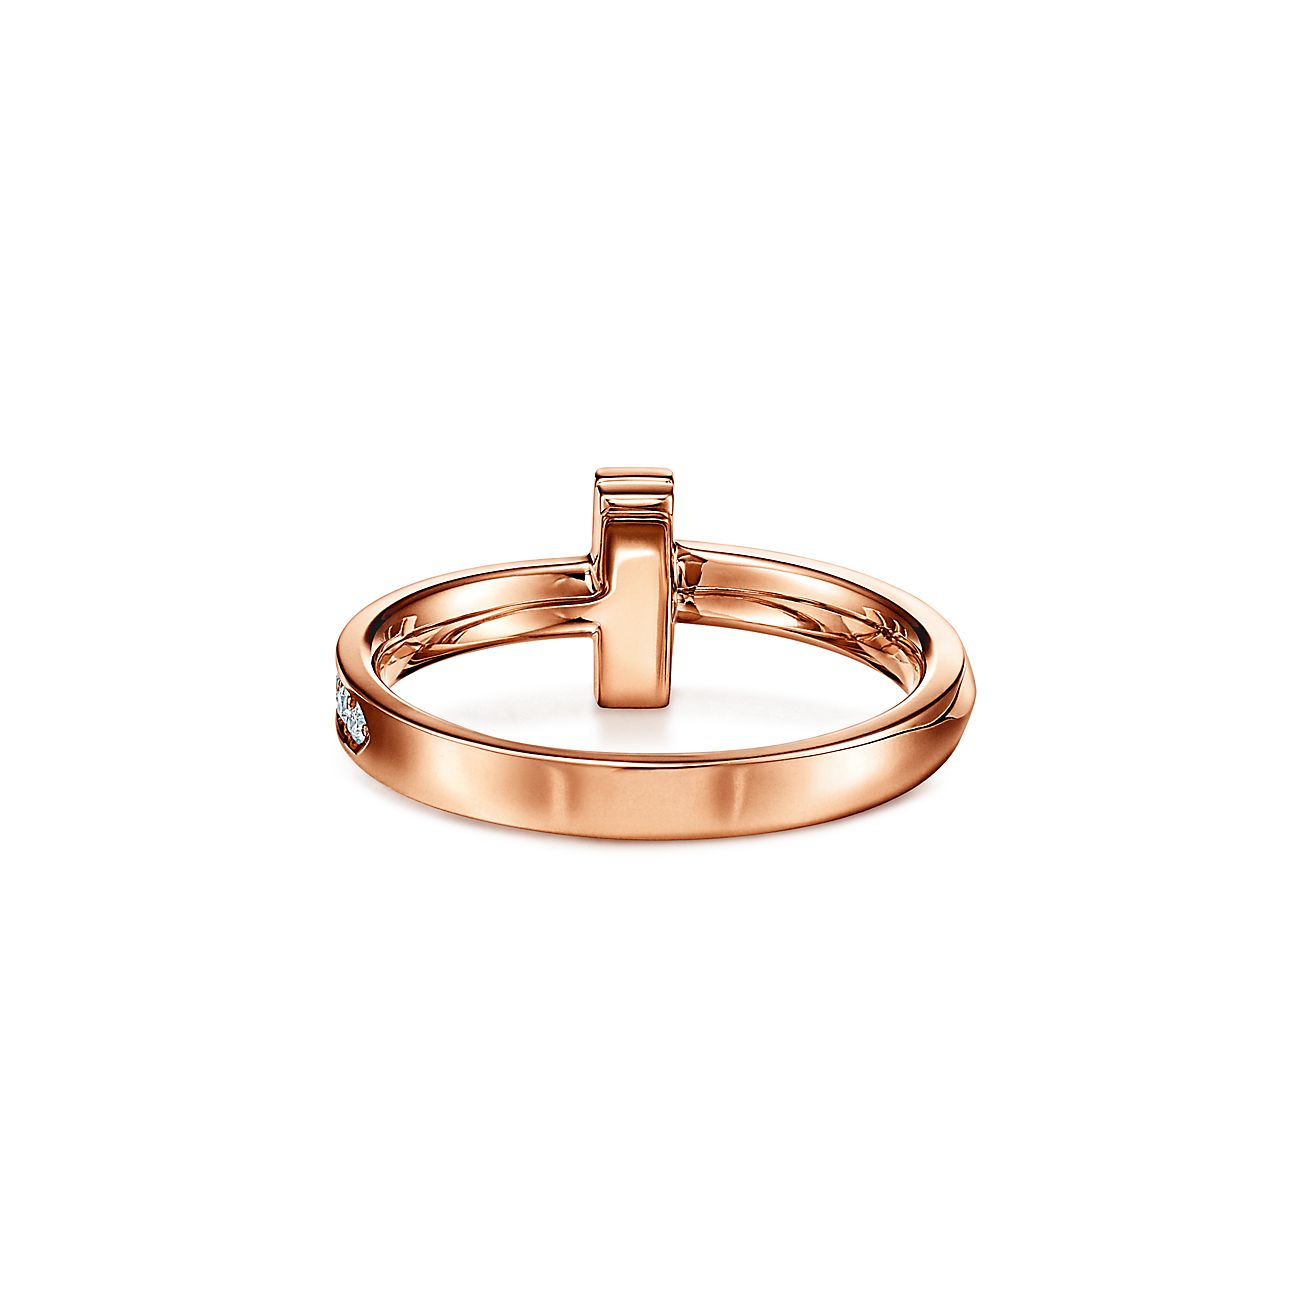 Tiffany T T1 Ring in Rose Gold with Diamonds, 2.5 mm | Tiffany & Co.